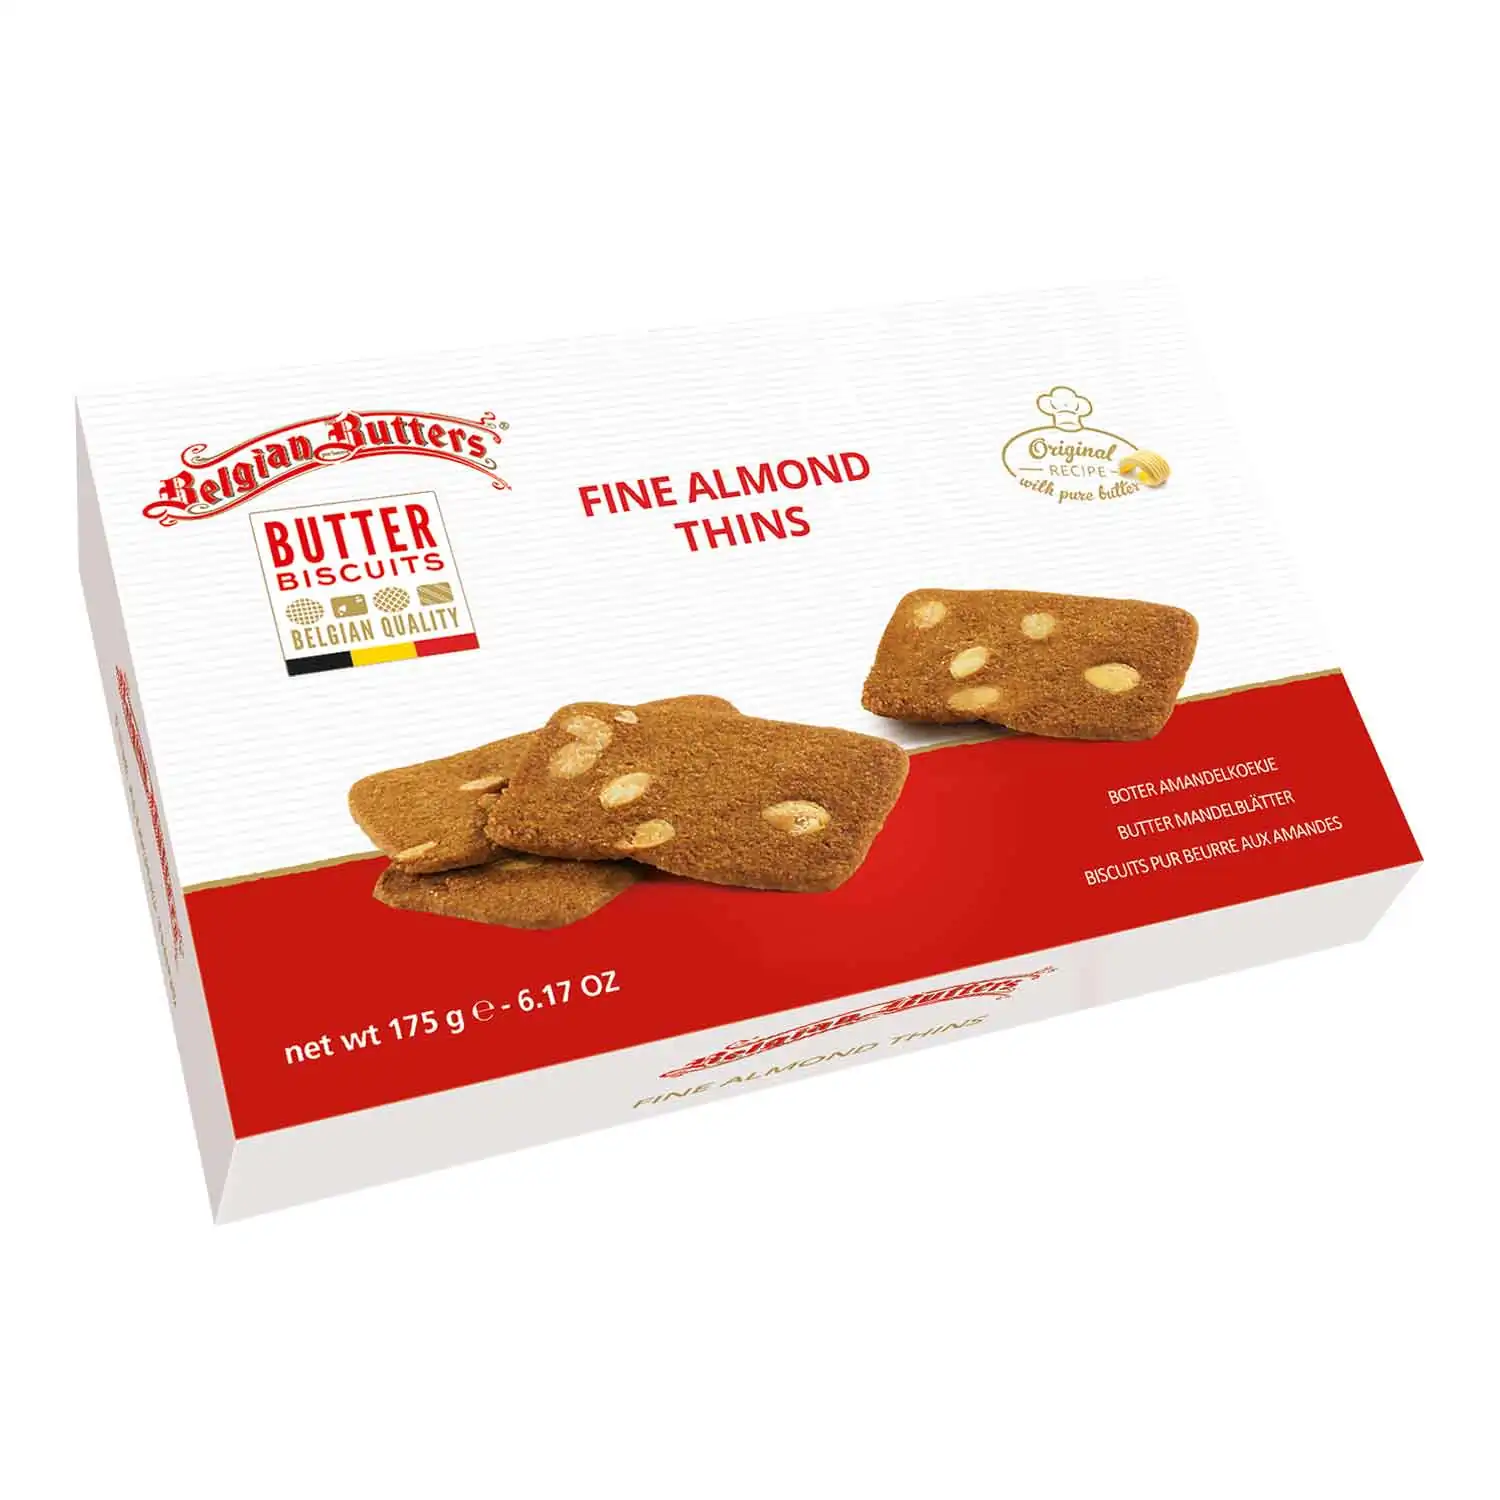 BB fine almond thins 175g - Buy at Real Tobacco